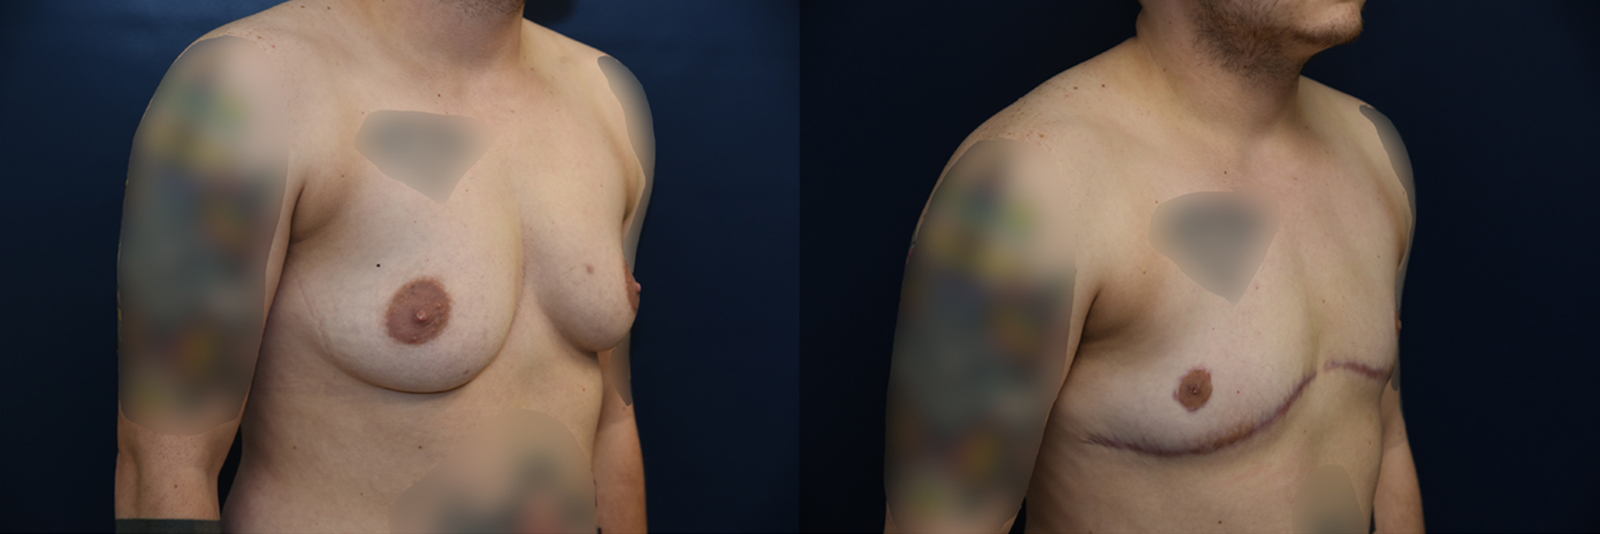 Female to Male Top Surgery Before and After Photo by Dr. Leveque of Gulf Coast Plastic Surgery in Pensacola, FL